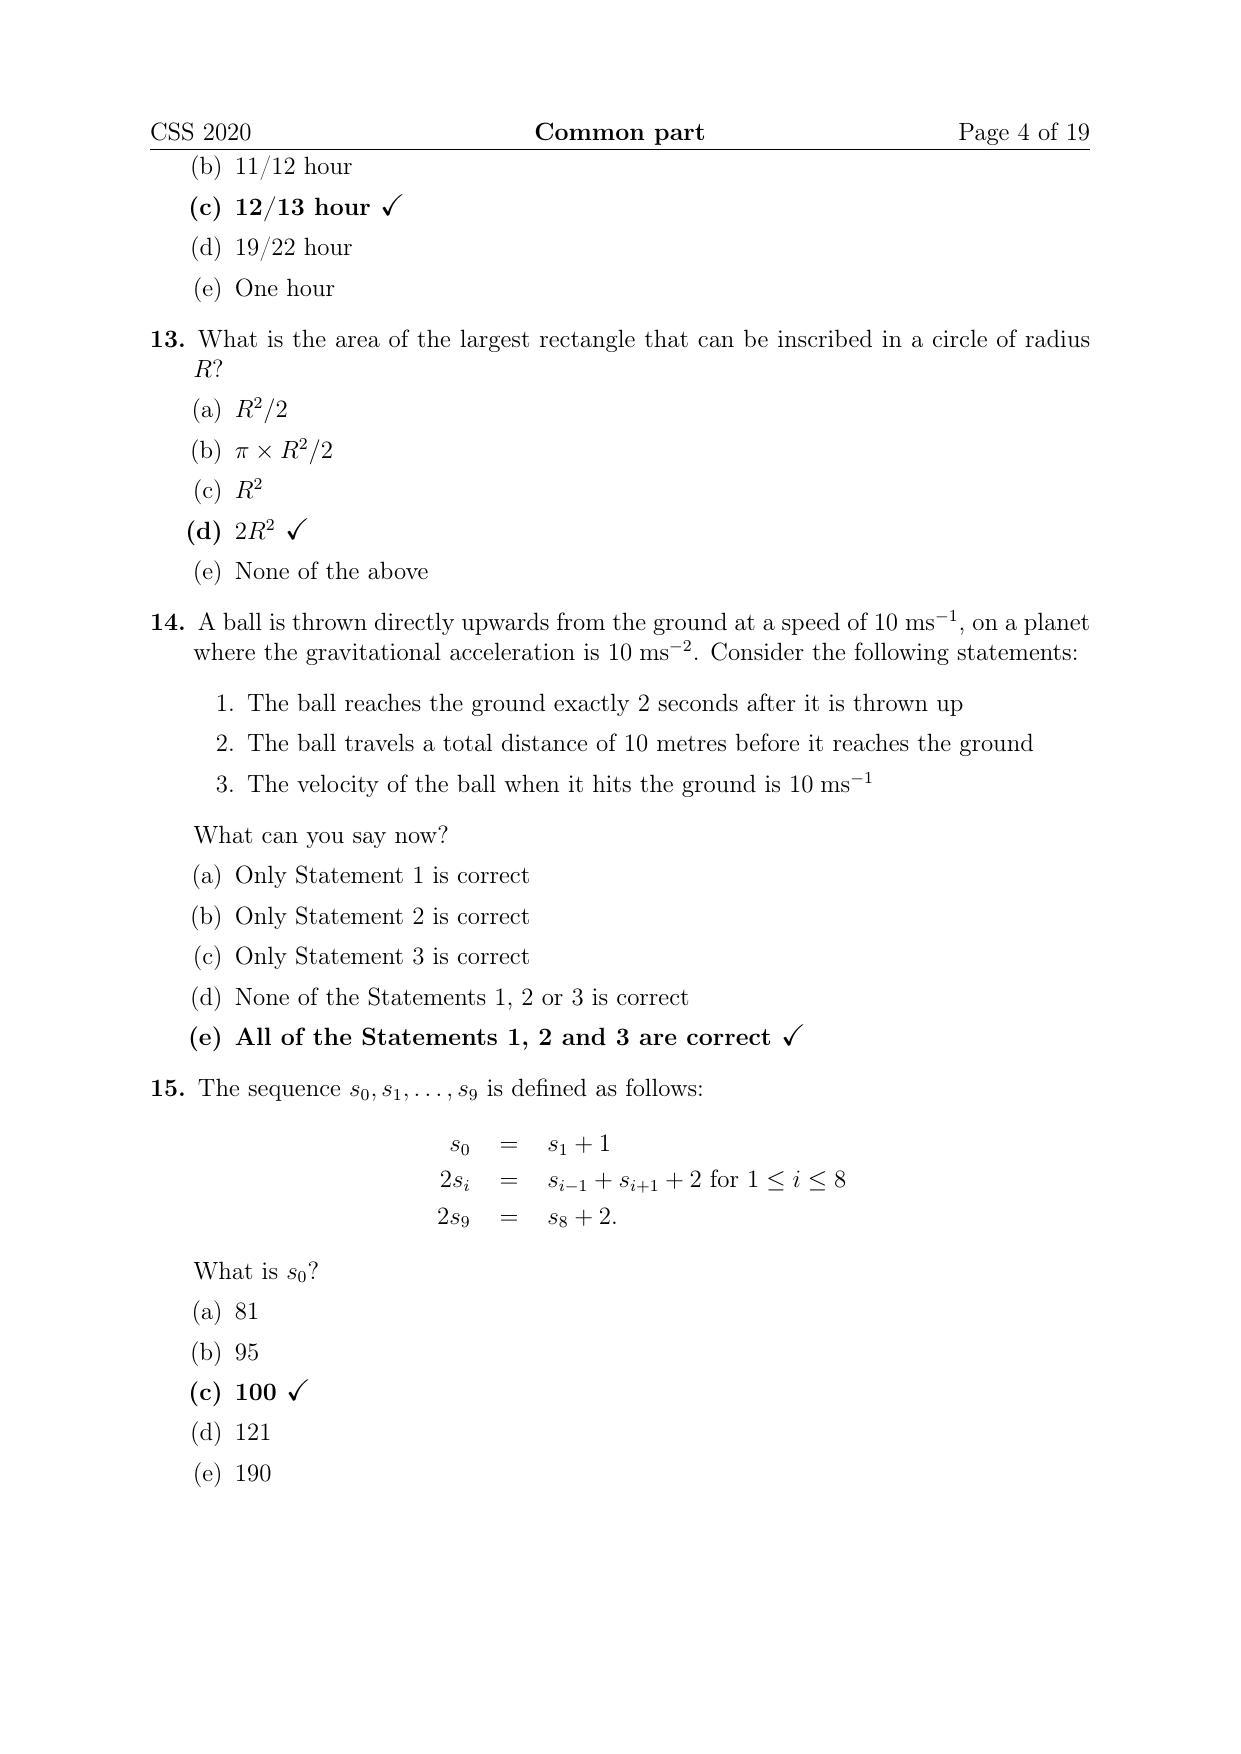 TIFR GS 2020 Computer & Systems Sciences Question Paper - Page 4